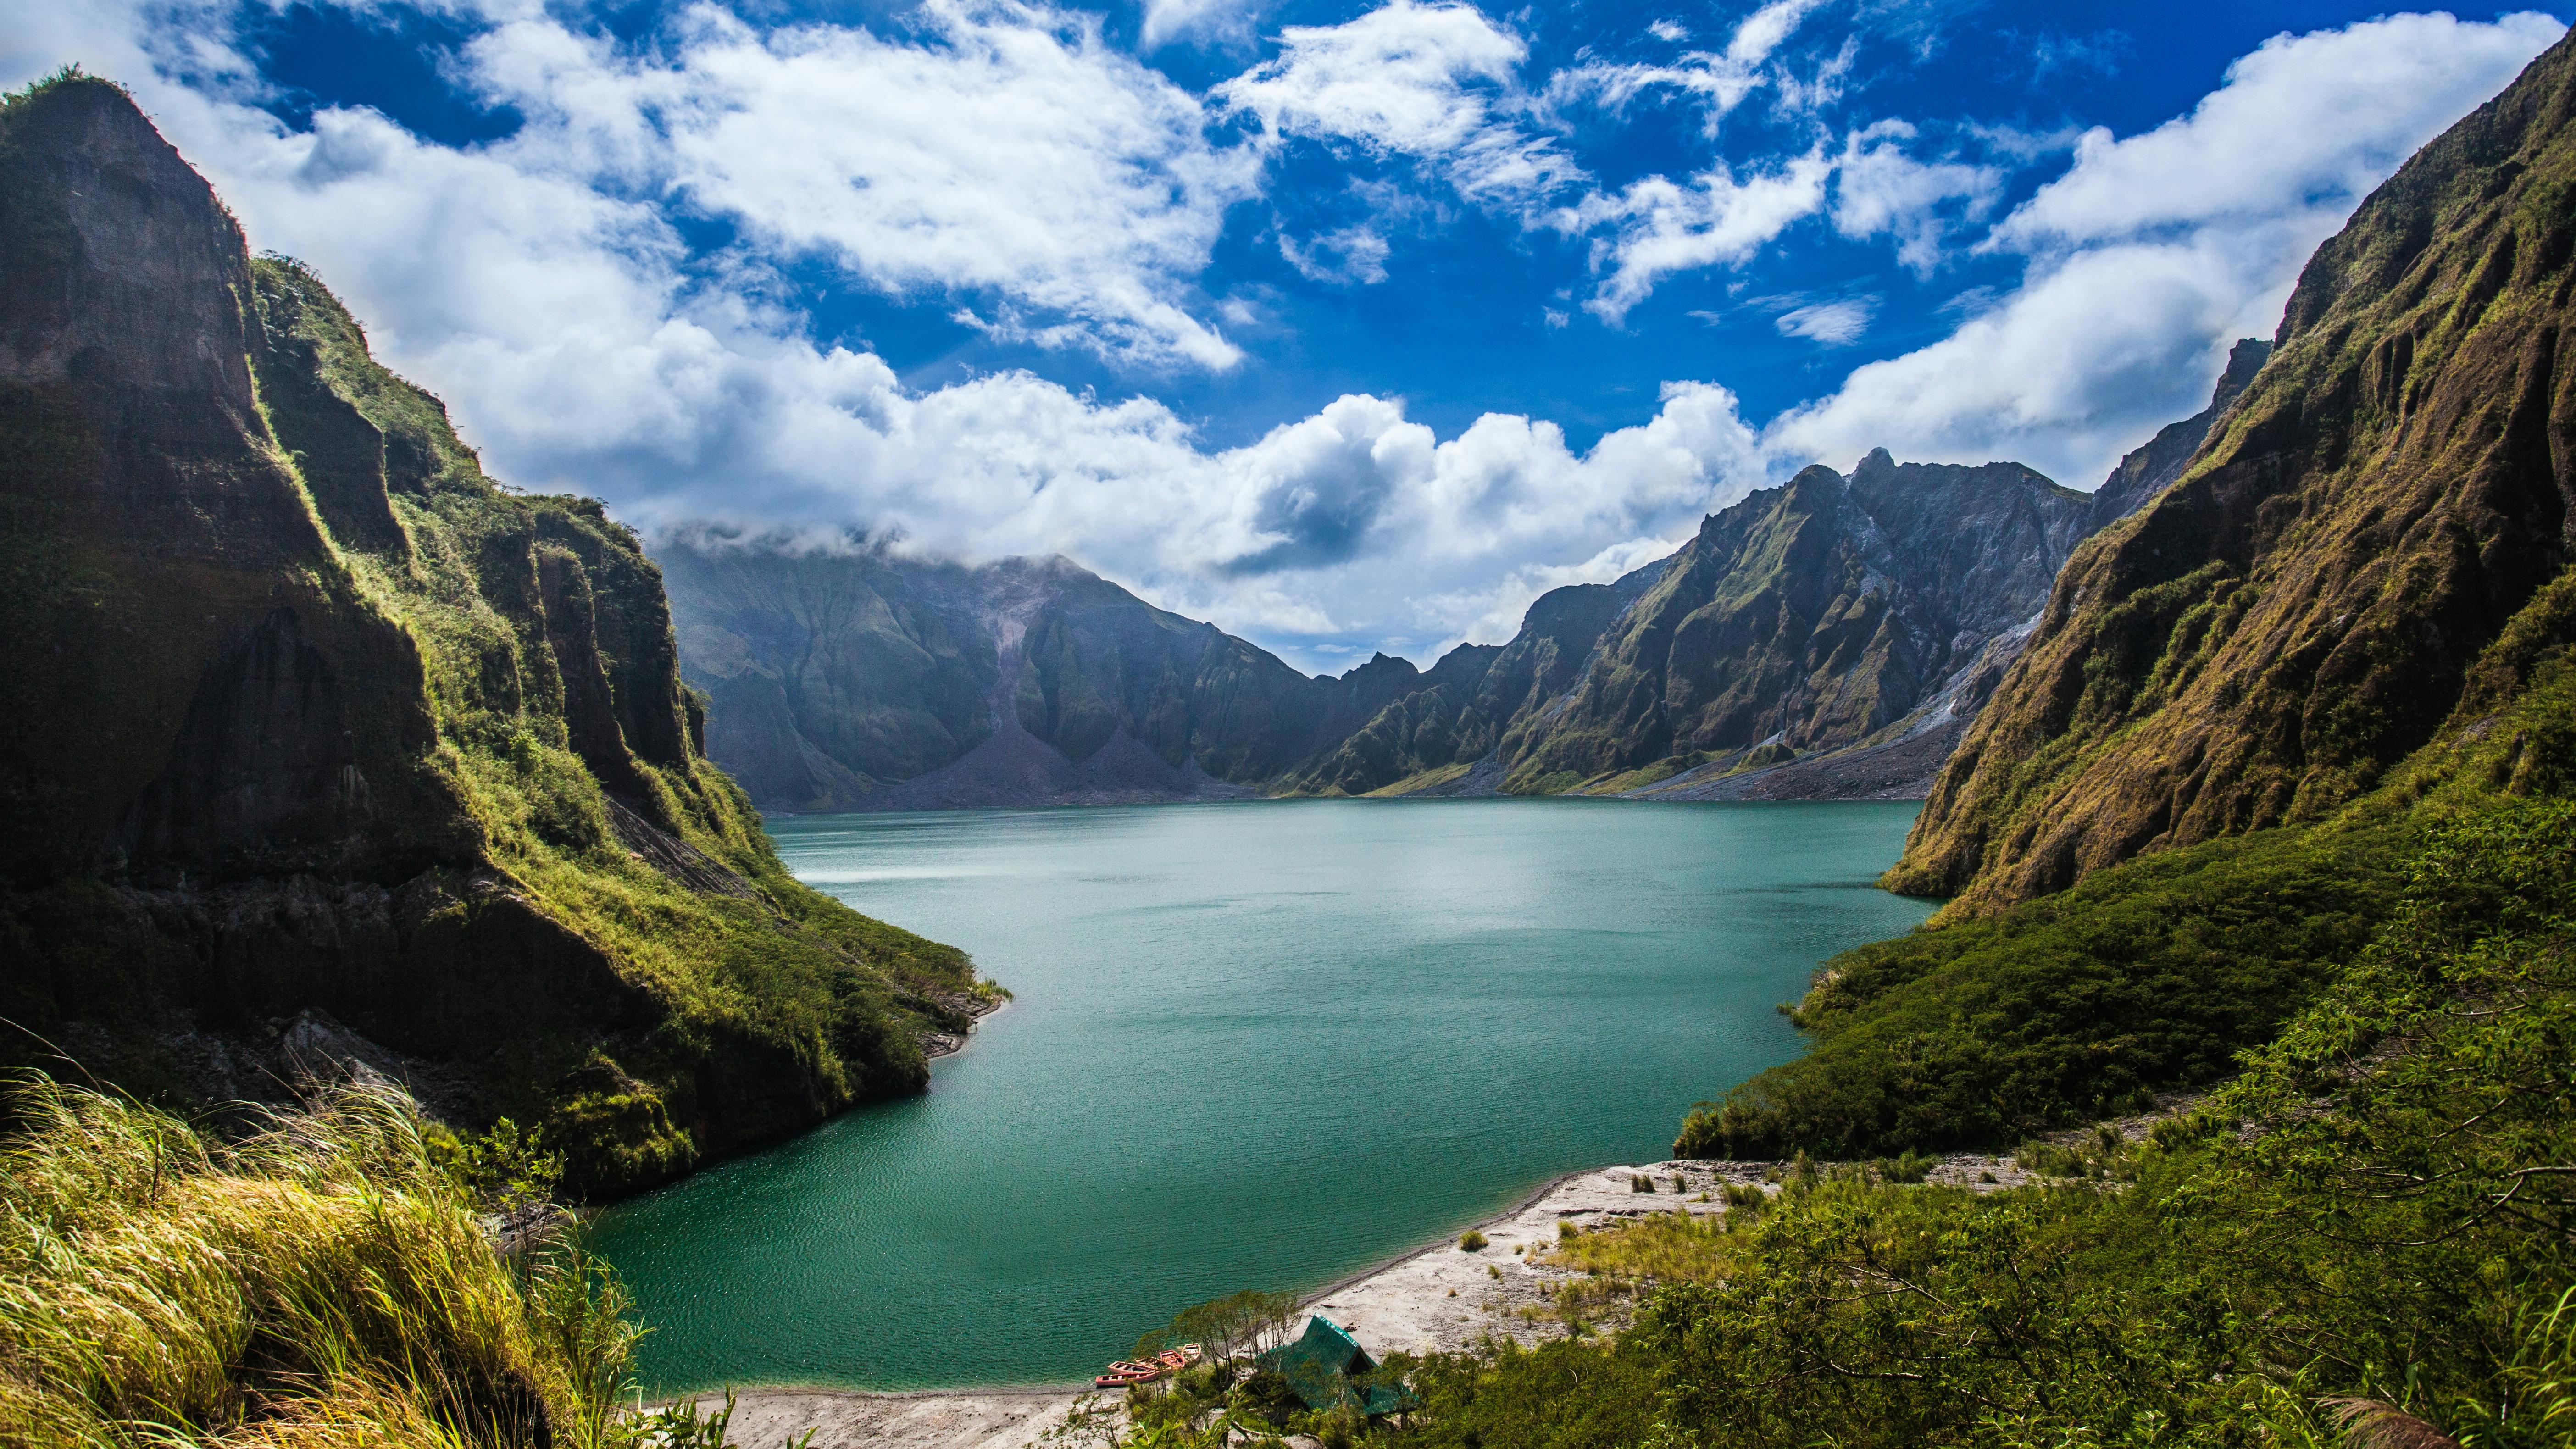 Crater Lake of Mount Pinatubo, a popular tourist spot in the Philippines